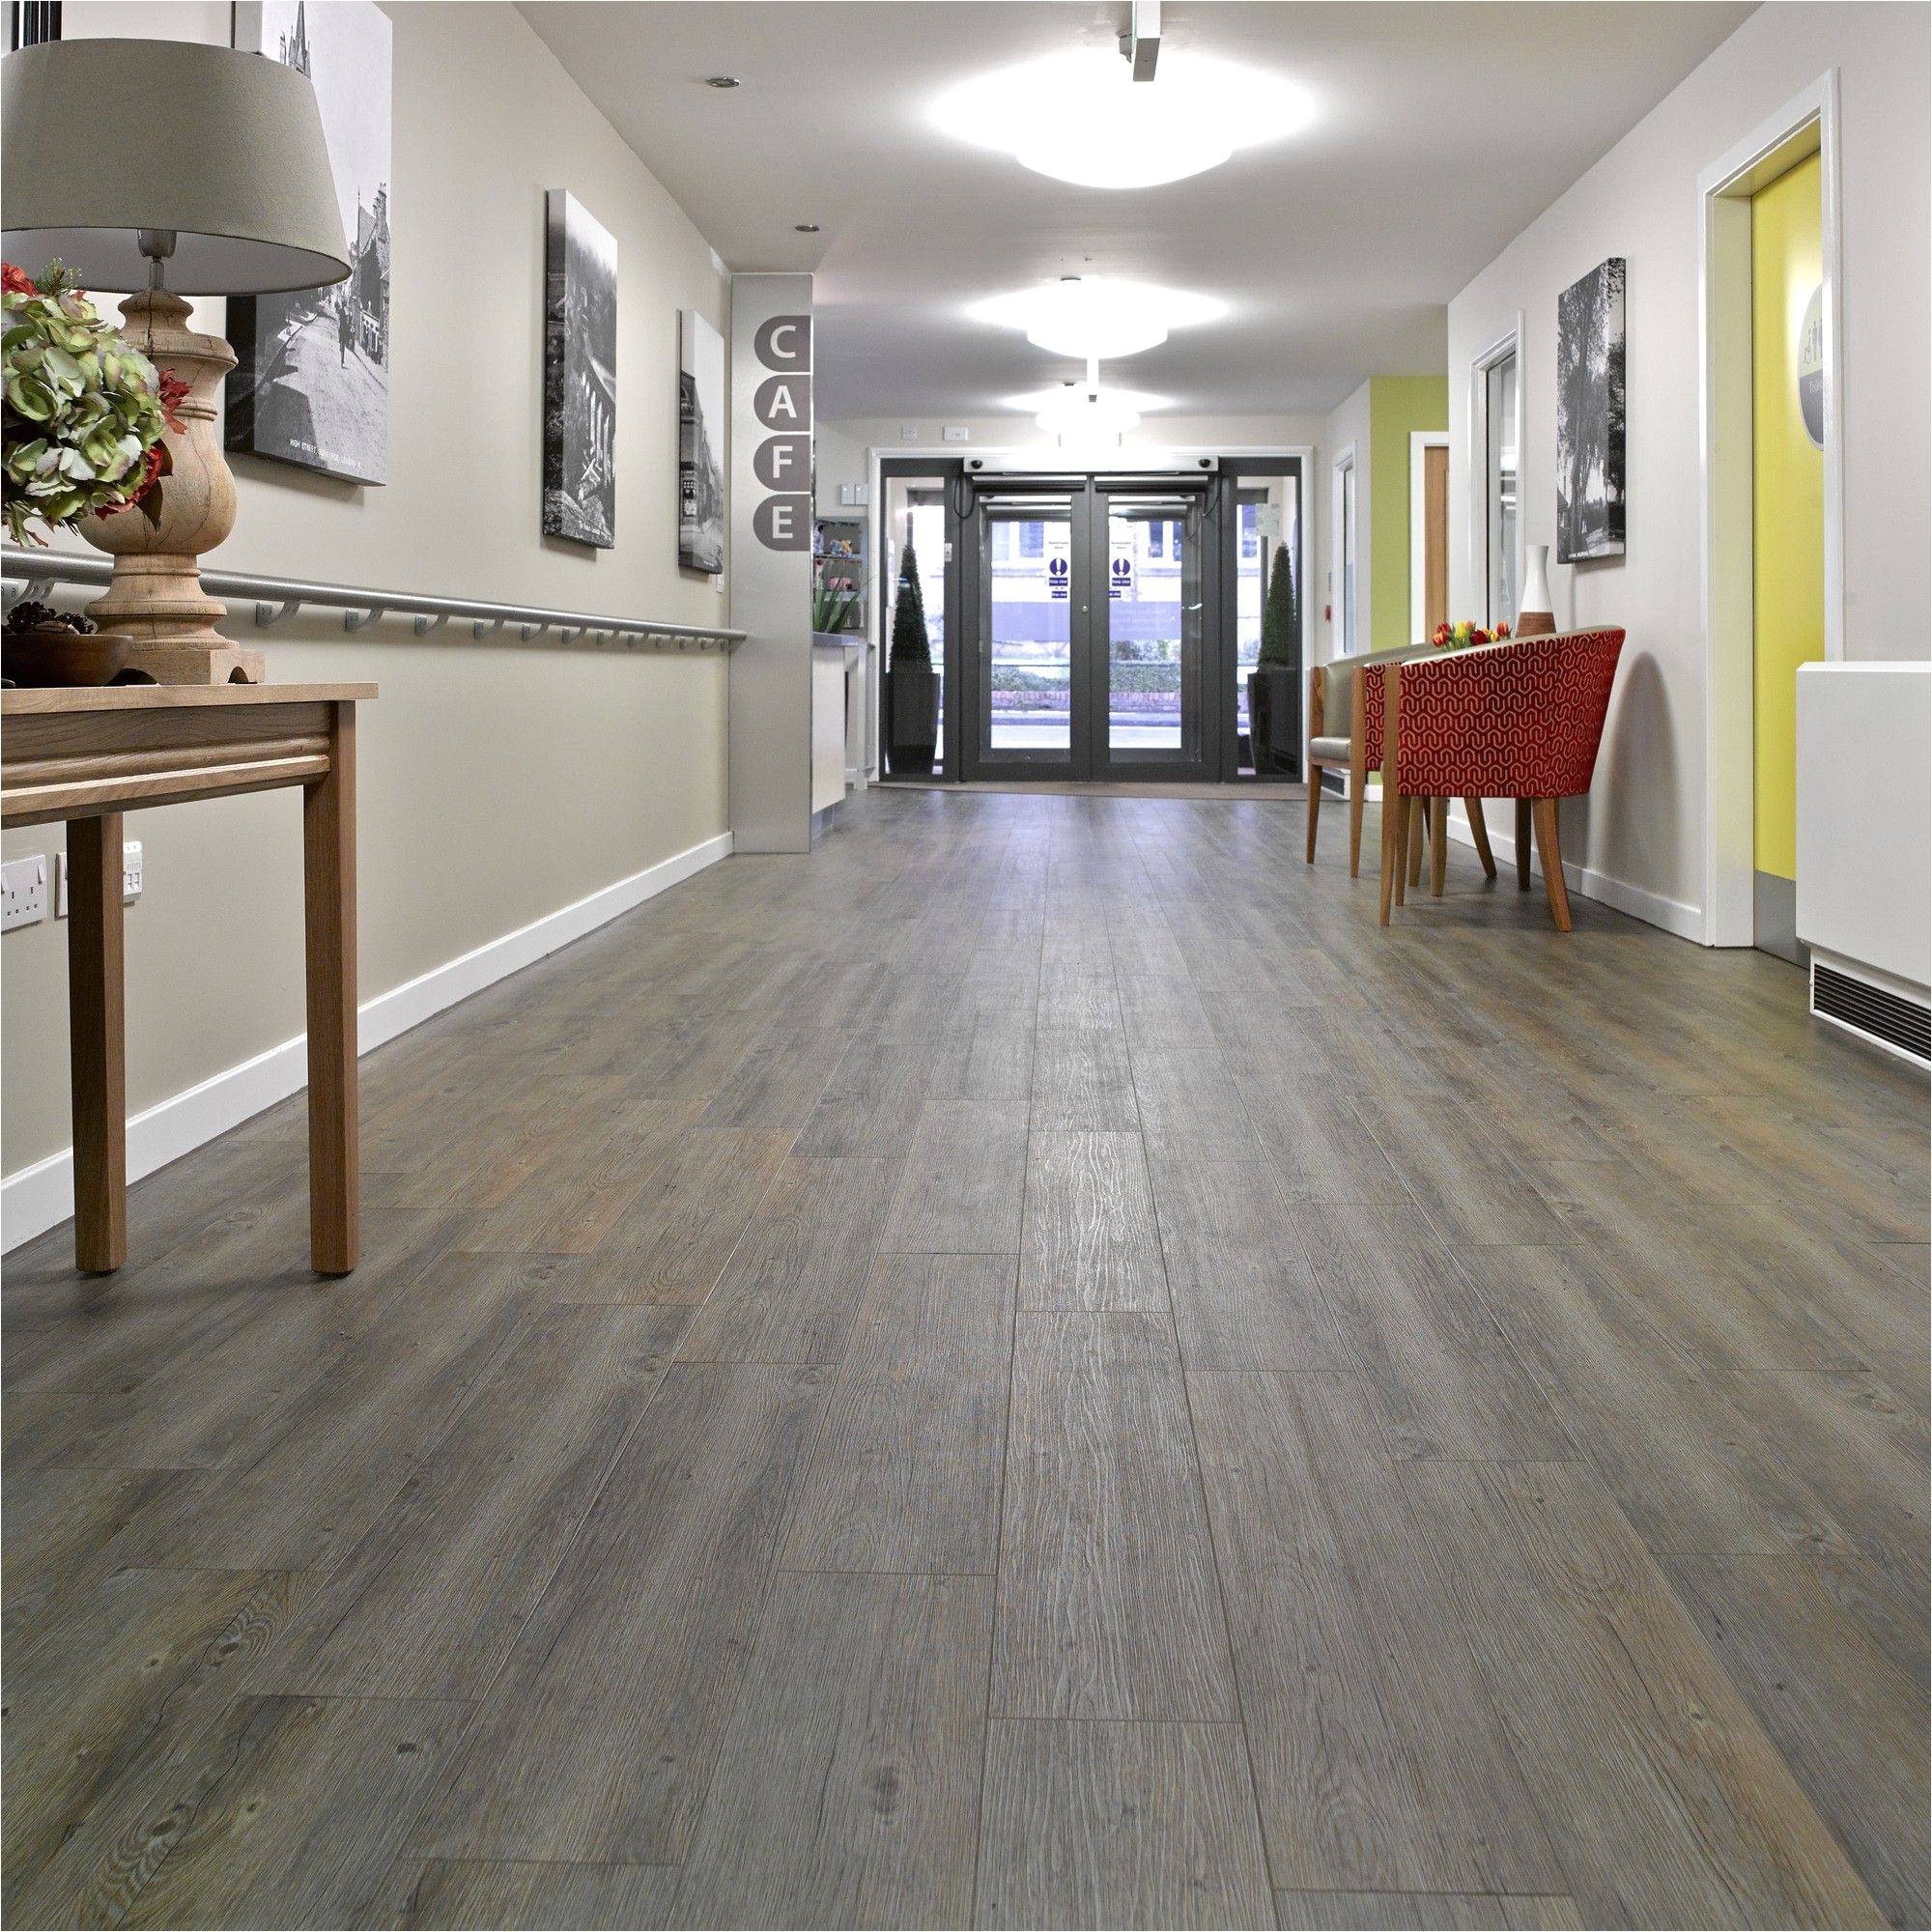 architects hackland dore decided these wood effect bevel edged planks made by vinyl flooring specialist gerflor